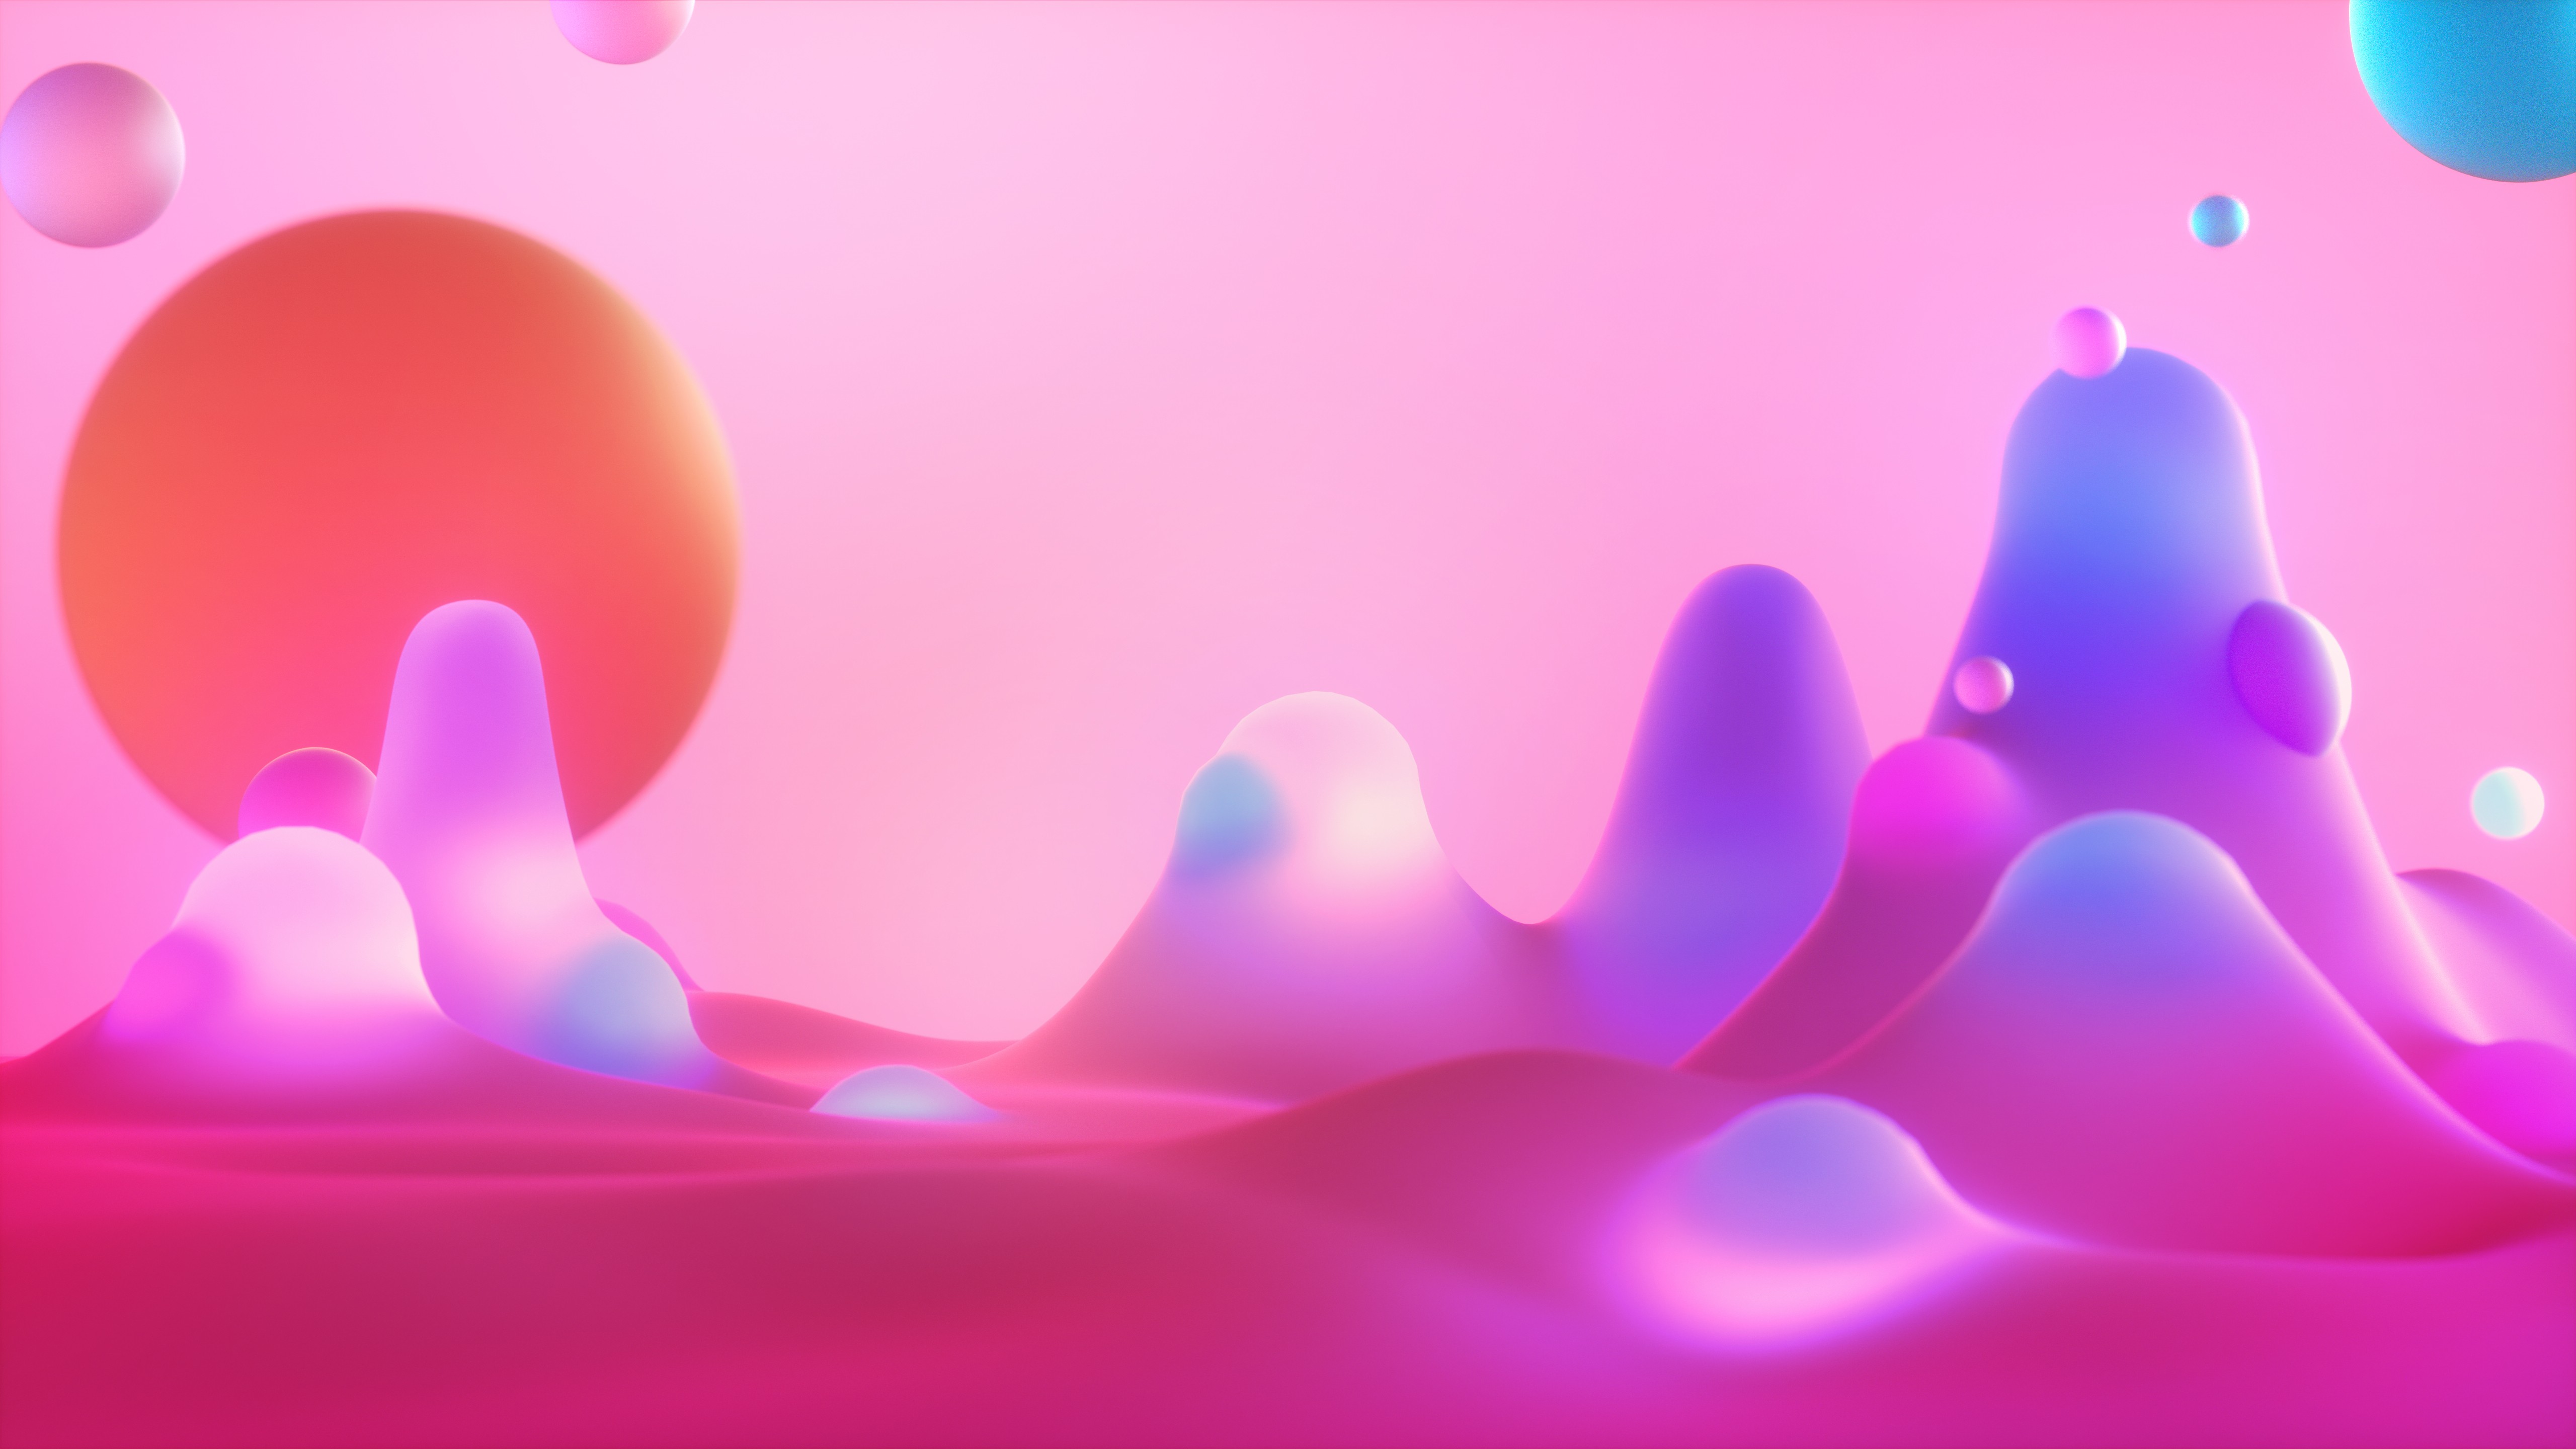 Opera Browser Neon Colorful Render 5120x2880